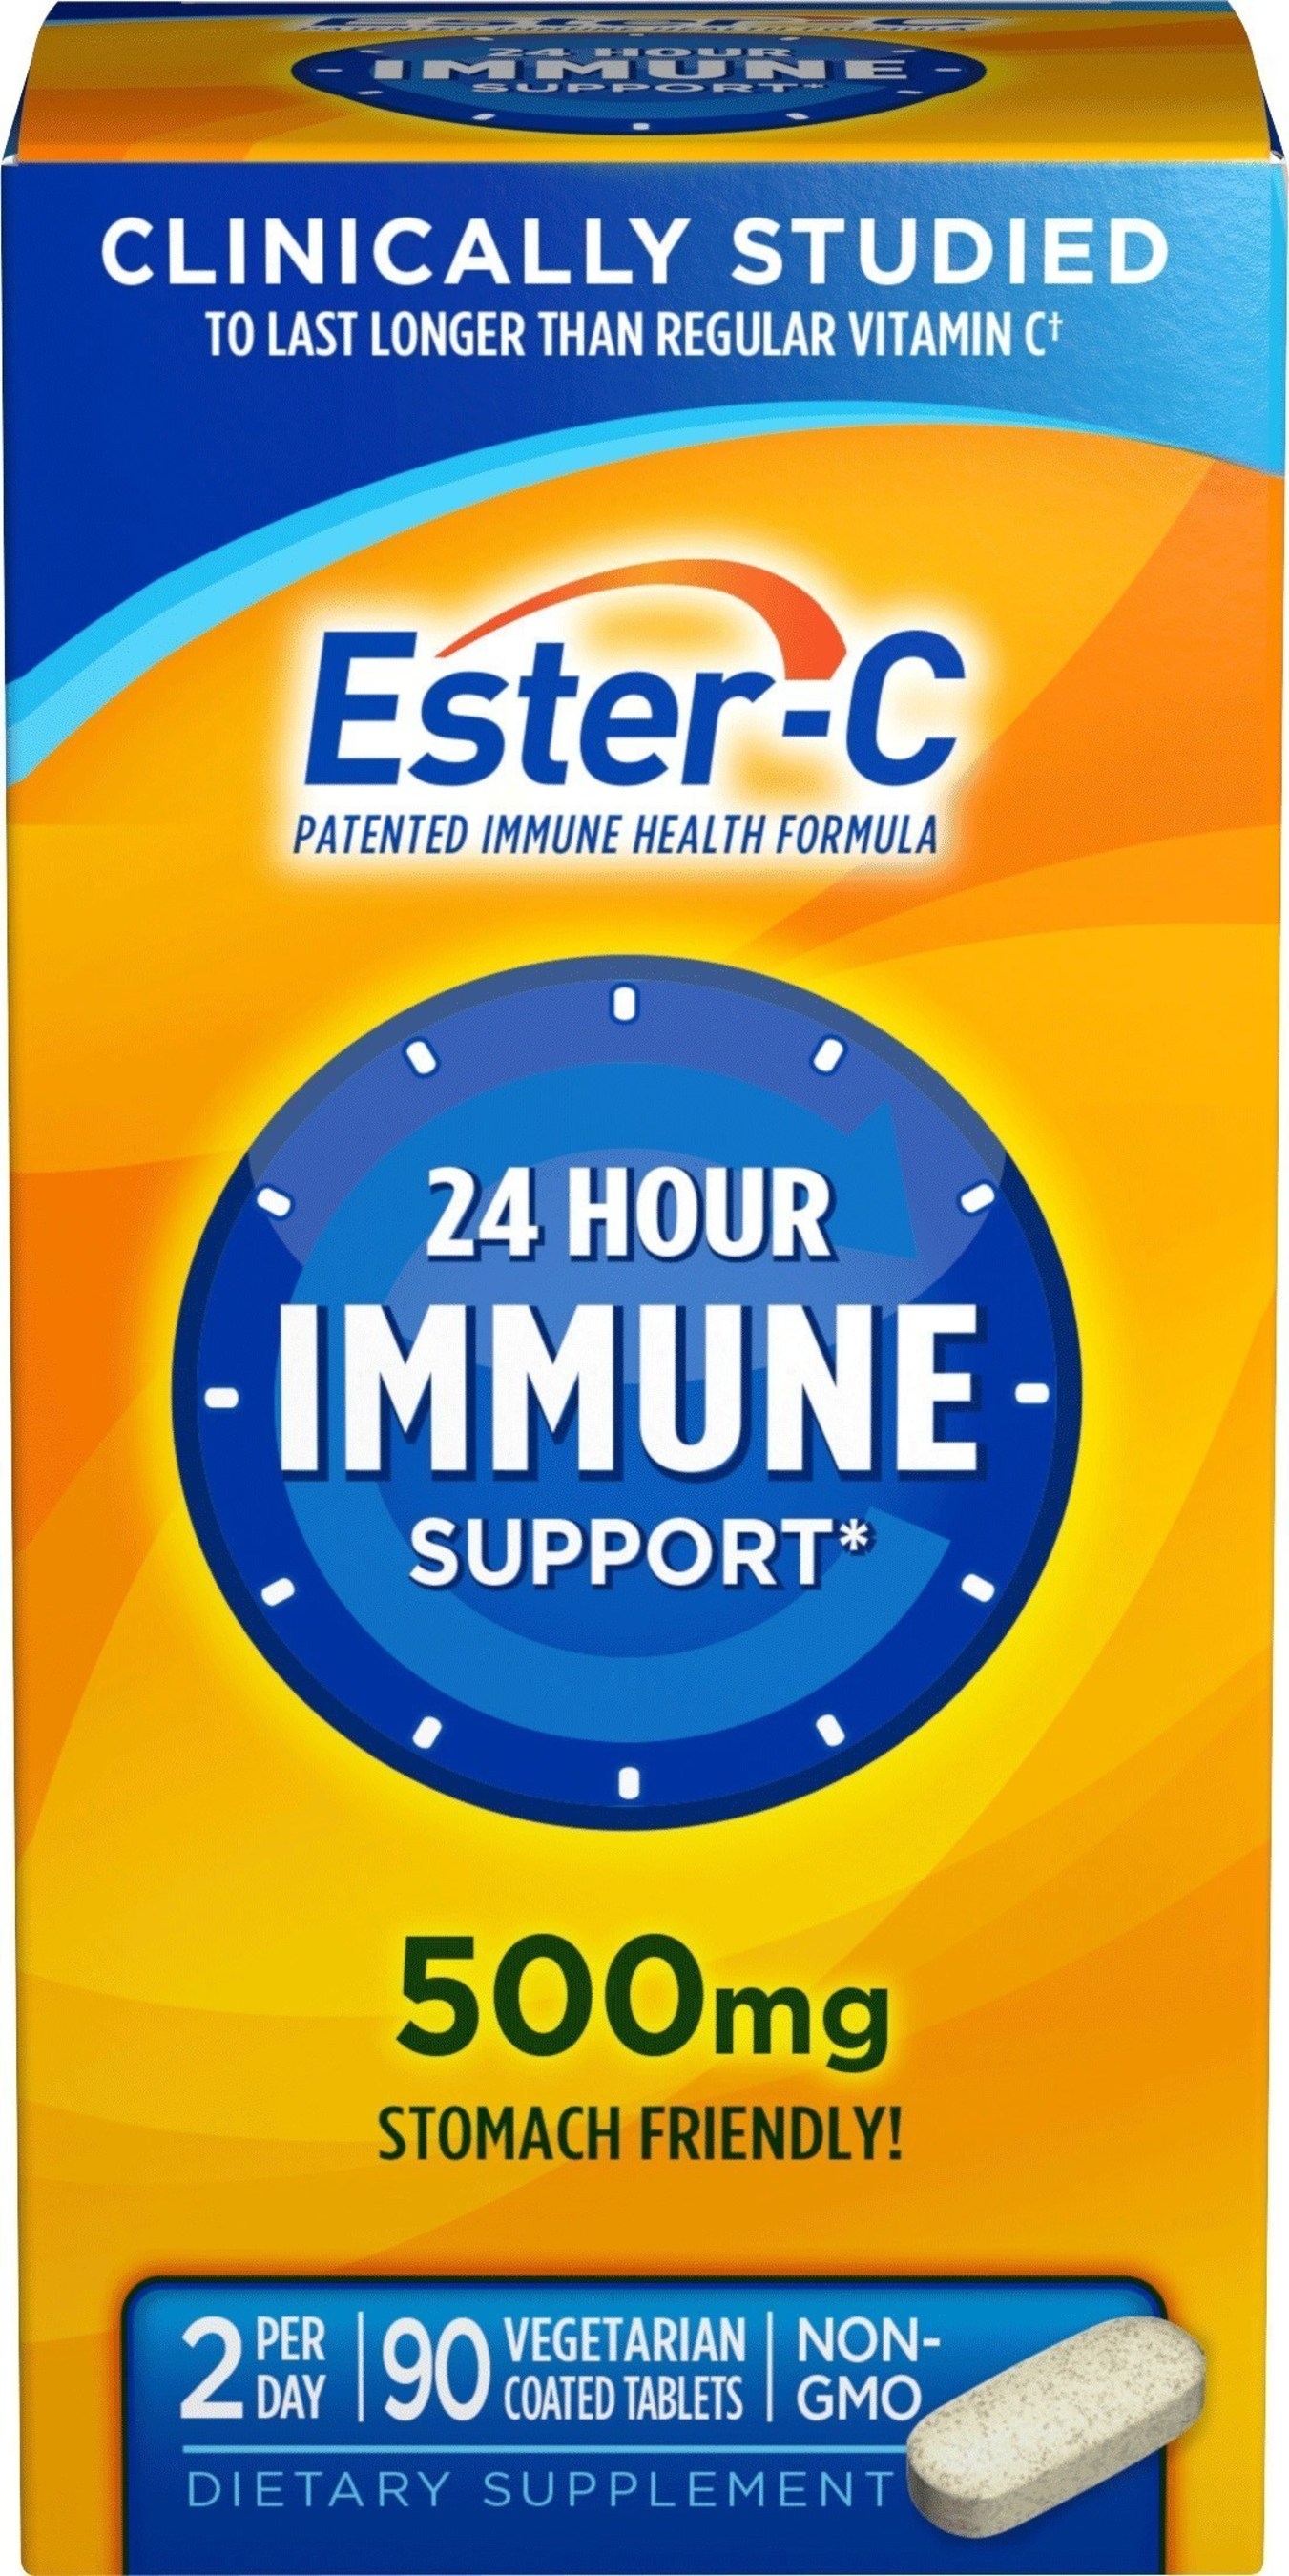 Ester-C(R) 500mg Tablets provide the support you can count on all day, every day. A daily dose of Ester-C(R) gets into your white blood cells, and stays there - for up to 24 hours, which is longer than regular Vitamin C. Plus, Ester-C(R) is manufactured without chemicals to neutralize pH, which means it's non-acidic and gentle on your stomach.